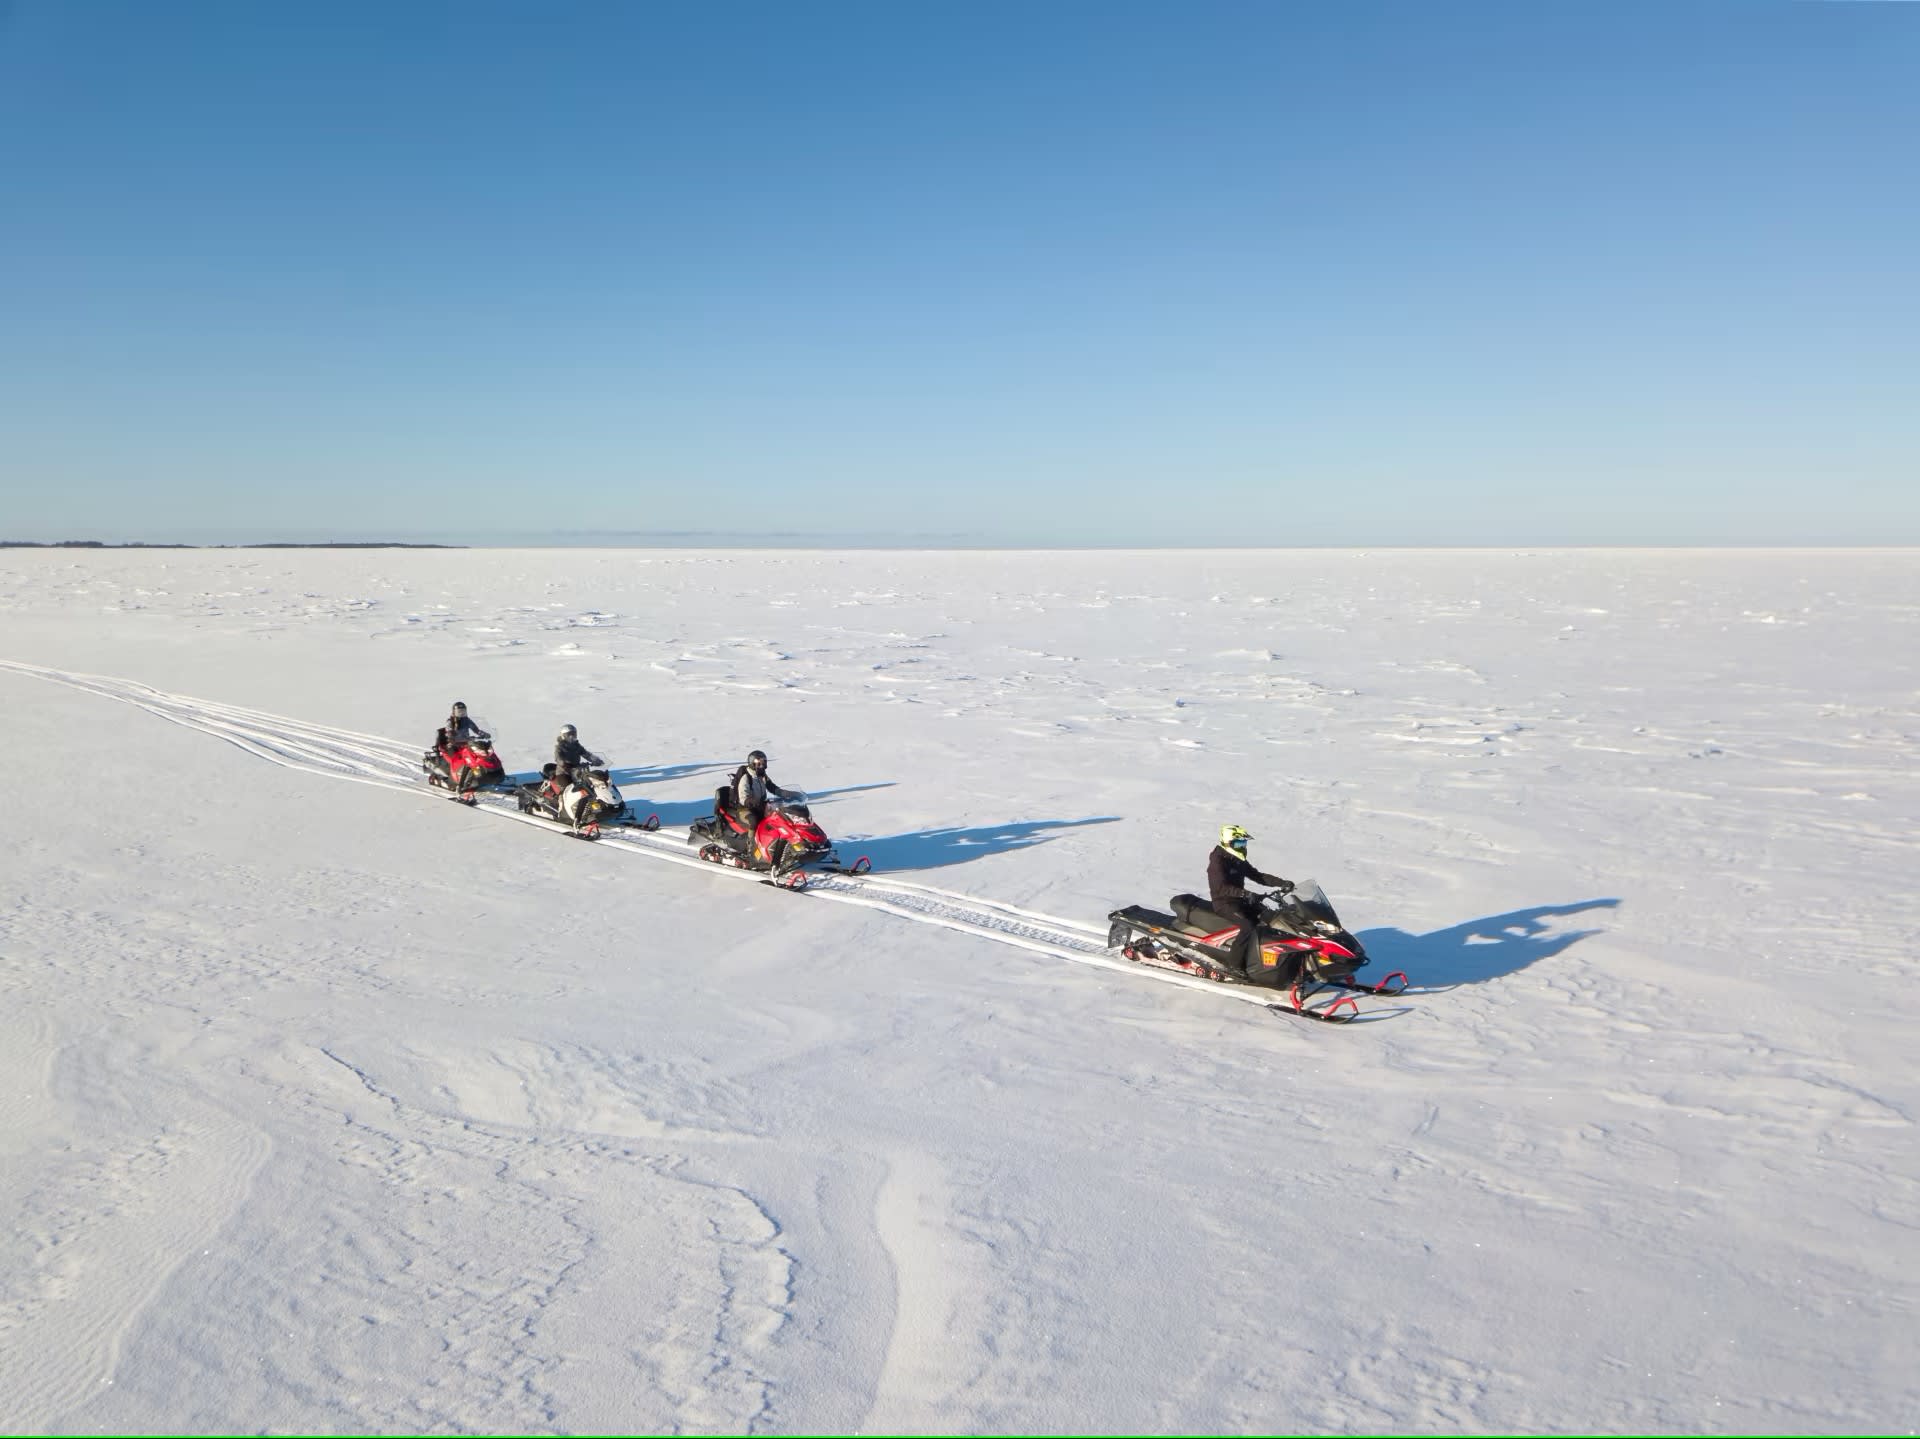 Sledders driving snowmobiles on ice.